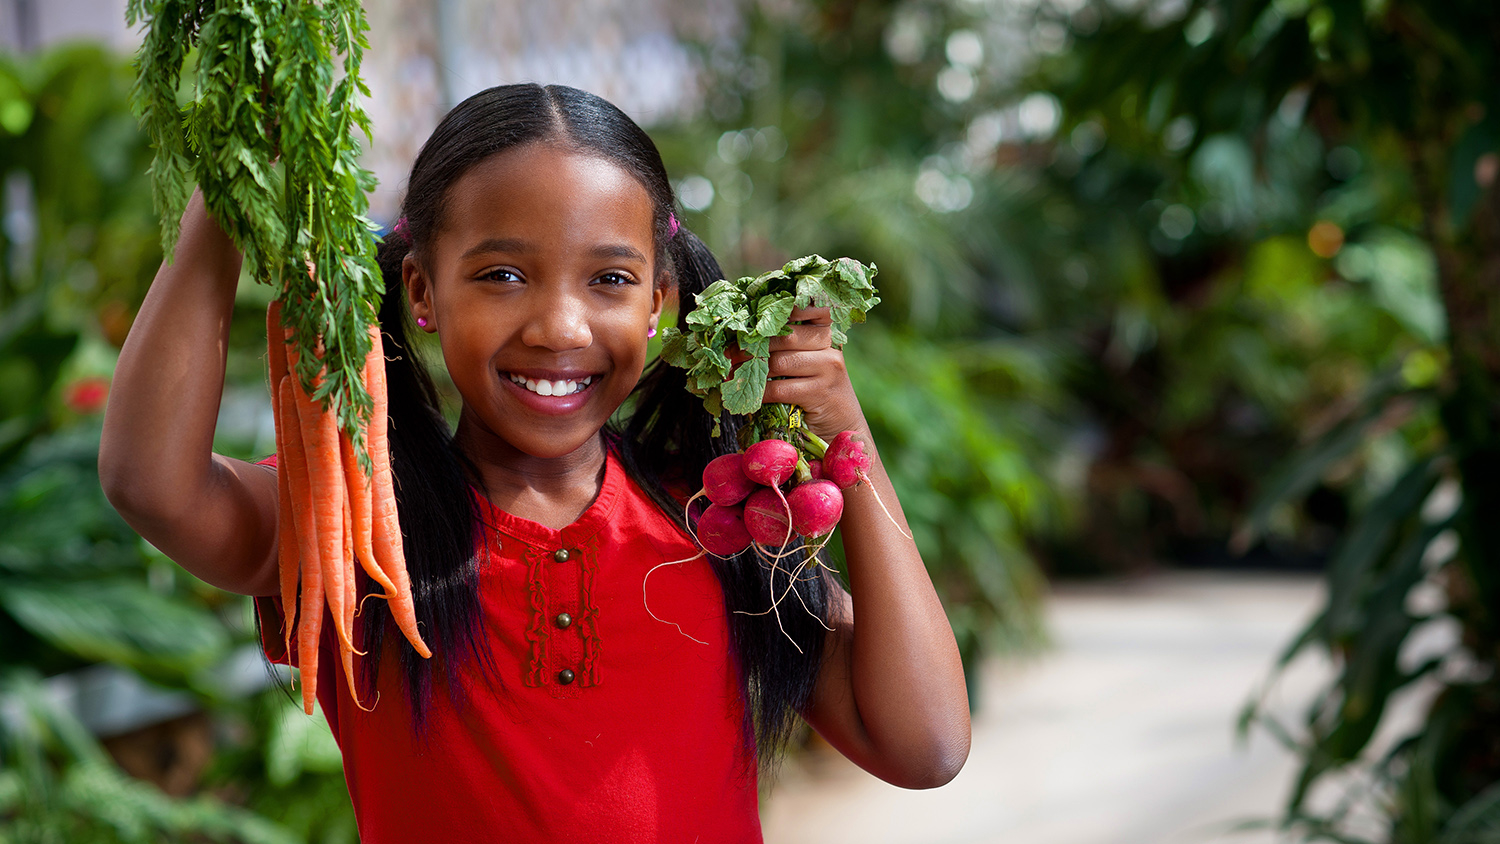 agriculture, carrot, girl, green house, hunt microsite, raddish, red, sustainable, vegtable.